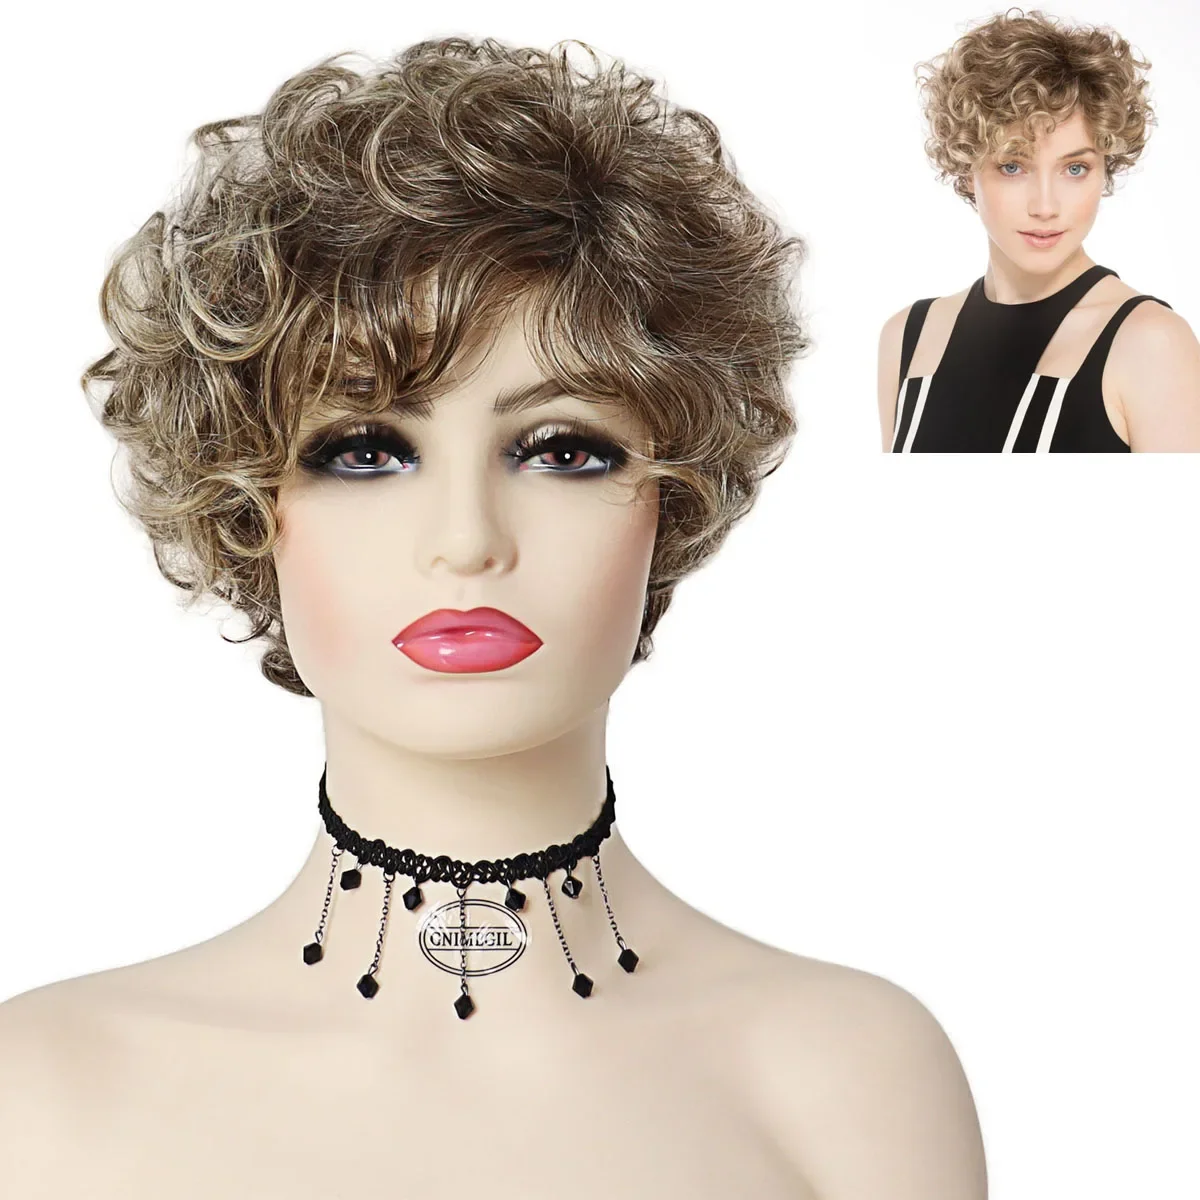 

GNIMEGIL Synthetic Short Curly Wigs for Women Blonde Wig with Dark Root Ombre Natural Hairstyle Cosplay Halloween Party Daily